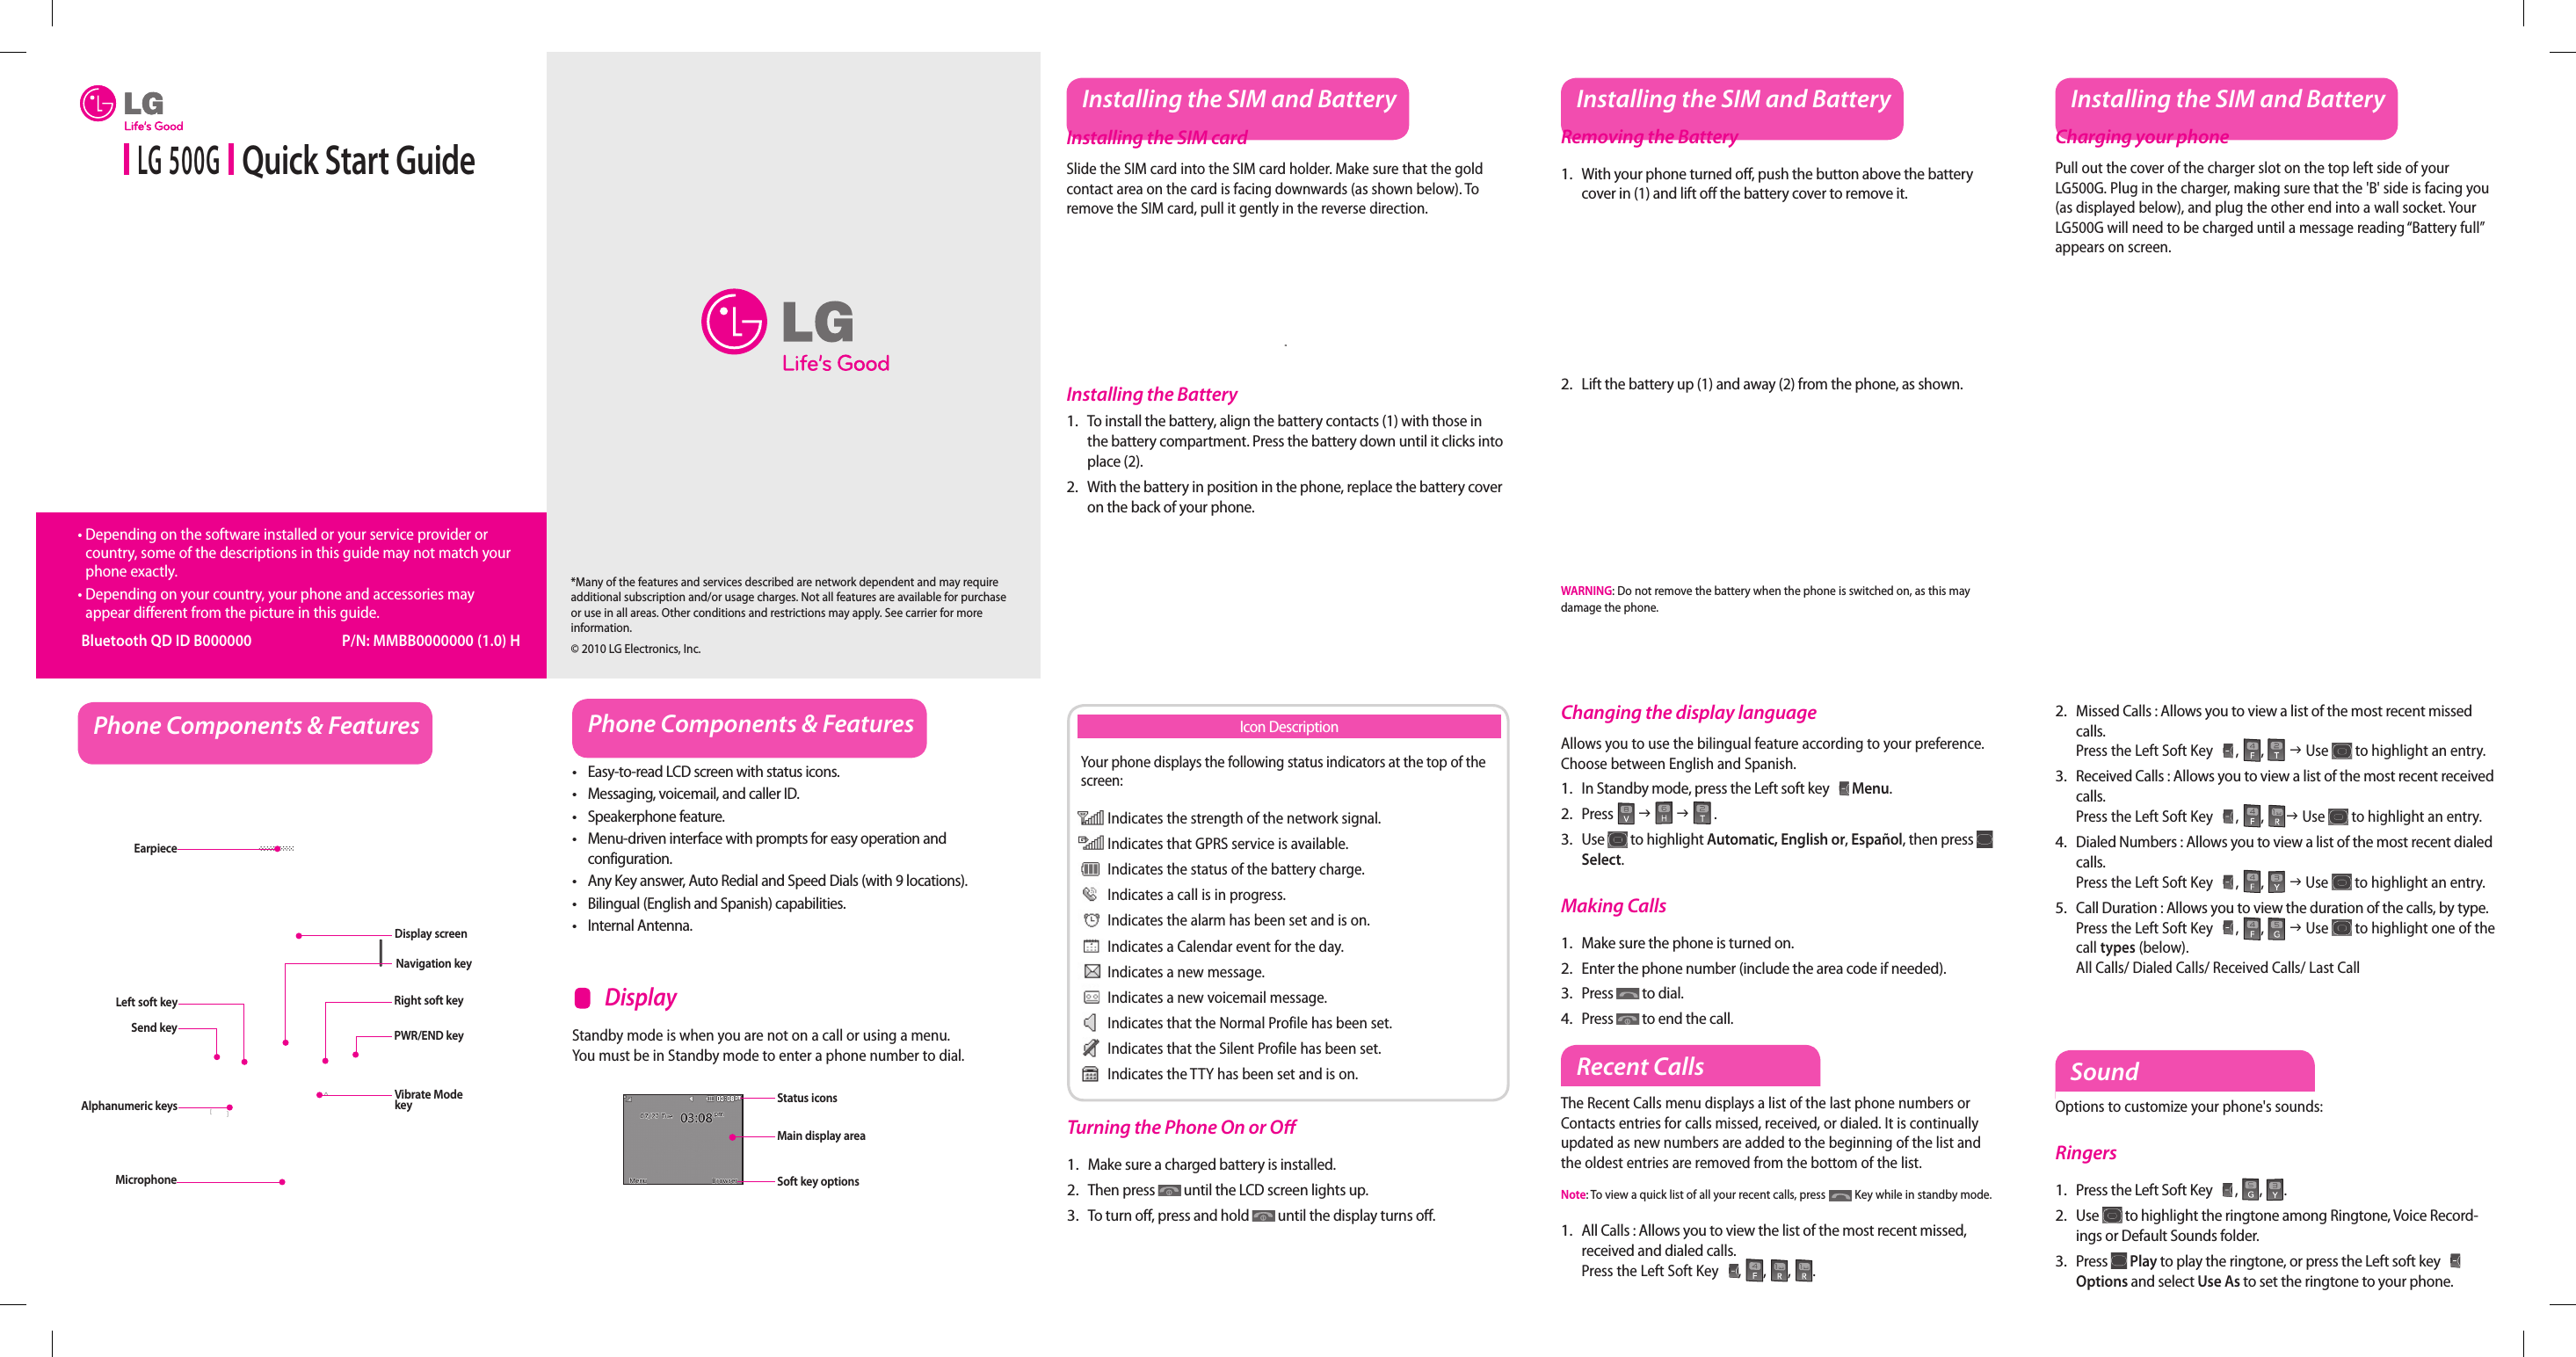  LG 500G   Quick Start Guide•  Depending on the software installed or your service provider or country, some of the descriptions in this guide may not match your phone exactly.•  Depending on your country, your phone and accessories may appear different from the picture in this guide. Bluetooth QD ID B000000  P/N: MMBB0000000 (1.0) HInstalling the SIM and BatteryInstalling the SIM cardSlide the SIM card into the SIM card holder. Make sure that the gold contact area on the card is facing downwards (as shown below). To remove the SIM card, pull it gently in the reverse direction.Installing the BatteryTo install the battery, align the battery contacts (1) with those in the battery compartment. Press the battery down until it clicks into place (2).With the battery in position in the phone, replace the battery cover on the back of your phone.1.2.Removing the BatteryWith your phone turned o , push the button above the battery cover in (1) and lift o  the battery cover to remove it.Lift the battery up (1) and away (2) from the phone, as shown.WARNING: Do not remove the battery when the phone is switched on, as this may damage the phone.1.2.Charging your phonePull out the cover of the charger slot on the top left side of your LG500G. Plug in the charger, making sure that the &apos;B&apos; side is facing you (as displayed below), and plug the other end into a wall socket. Your LG500G will need to be charged until a message reading “Battery full” appears on screen.Installing the SIM and Battery Installing the SIM and BatteryPhone Components &amp; Features Phone Components &amp; FeaturesEasy-to-read LCD screen with status icons.Messaging, voicemail, and caller ID.Speakerphone feature.Menu-driven interface with prompts for easy operation and configuration.Any Key answer, Auto Redial and Speed Dials (with 9 locations).Bilingual (English and Spanish) capabilities.Internal Antenna.•••••••Earpiece Display screenSend keyAlphanumeric keysLeft soft keyMicrophoneRight soft keyPWR/END keyVibrate Mode keyStandby mode is when you are not on a call or using a menu. You must be in Standby mode to enter a phone number to dial.    DisplayNavigation keyStatus iconsMain display areaSoft key optionsYour phone displays the following status indicators at the top of the screen: Indicates the strength of the network signal. Indicates that GPRS service is available. Indicates the status of the battery charge. Indicates a call is in progress. Indicates the alarm has been set and is on. Indicates a Calendar event for the day. Indicates a new message. Indicates a new voicemail message. Indicates that the Normal Profile has been set. Indicates that the Silent Profile has been set. Indicates the TTY has been set and is on.Icon DescriptionTurning the Phone On or O Make sure a charged battery is installed.Then press   until the LCD screen lights up.To turn o , press and hold   until the display turns o .1.2.3.Changing the display languageAllows you to use the bilingual feature according to your preference. Choose between English and Spanish.In Standby mode, press the Left soft key   Menu.Press   J   J  .Use   to highlight Automatic, English or, Español, then press   Select.Making CallsMake sure the phone is turned on.Enter the phone number (include the area code if needed).Press   to dial.Press   to end the call.1.2.3.1.2.3.4.Recent CallsThe Recent Calls menu displays a list of the last phone numbers or Contacts entries for calls missed, received, or dialed. It is continually updated as new numbers are added to the beginning of the list and the oldest entries are removed from the bottom of the list.Note: To view a quick list of all your recent calls, press   Key while in standby mode.All Calls : Allows you to view the list of the most recent missed, received and dialed calls.  Press the Left Soft Key , , ,  . 1.SoundOptions to customize your phone&apos;s sounds:RingersPress the Left Soft Key   , ,  .Use  to highlight the ringtone among Ringtone, Voice Record-ings or Default Sounds folder.Press   Play to play the ringtone, or press the Left soft key   Options and select Use As to set the ringtone to your phone.1.2.3.Missed Calls : Allows you to view a list of the most recent missed calls.   Press the Left Soft Key  , ,  J Use  to highlight an entry.Received Calls : Allows you to view a list of the most recent received calls.   Press the Left Soft Key  , , J Use  to highlight an entry.Dialed Numbers : Allows you to view a list of the most recent dialed calls.   Press the Left Soft Key  , ,  J Use  to highlight an entry.Call Duration : Allows you to view the duration of the calls, by type.   Press the Left Soft Key  , ,  J Use  to highlight one of the call types (below).All Calls/ Dialed Calls/ Received Calls/ Last Call2.3.4.5.*Many of the features and services described are network dependent and may require additional subscription and/or usage charges. Not all features are available for purchase or use in all areas. Other conditions and restrictions may apply. See carrier for more information.© 2010 LG Electronics, Inc.